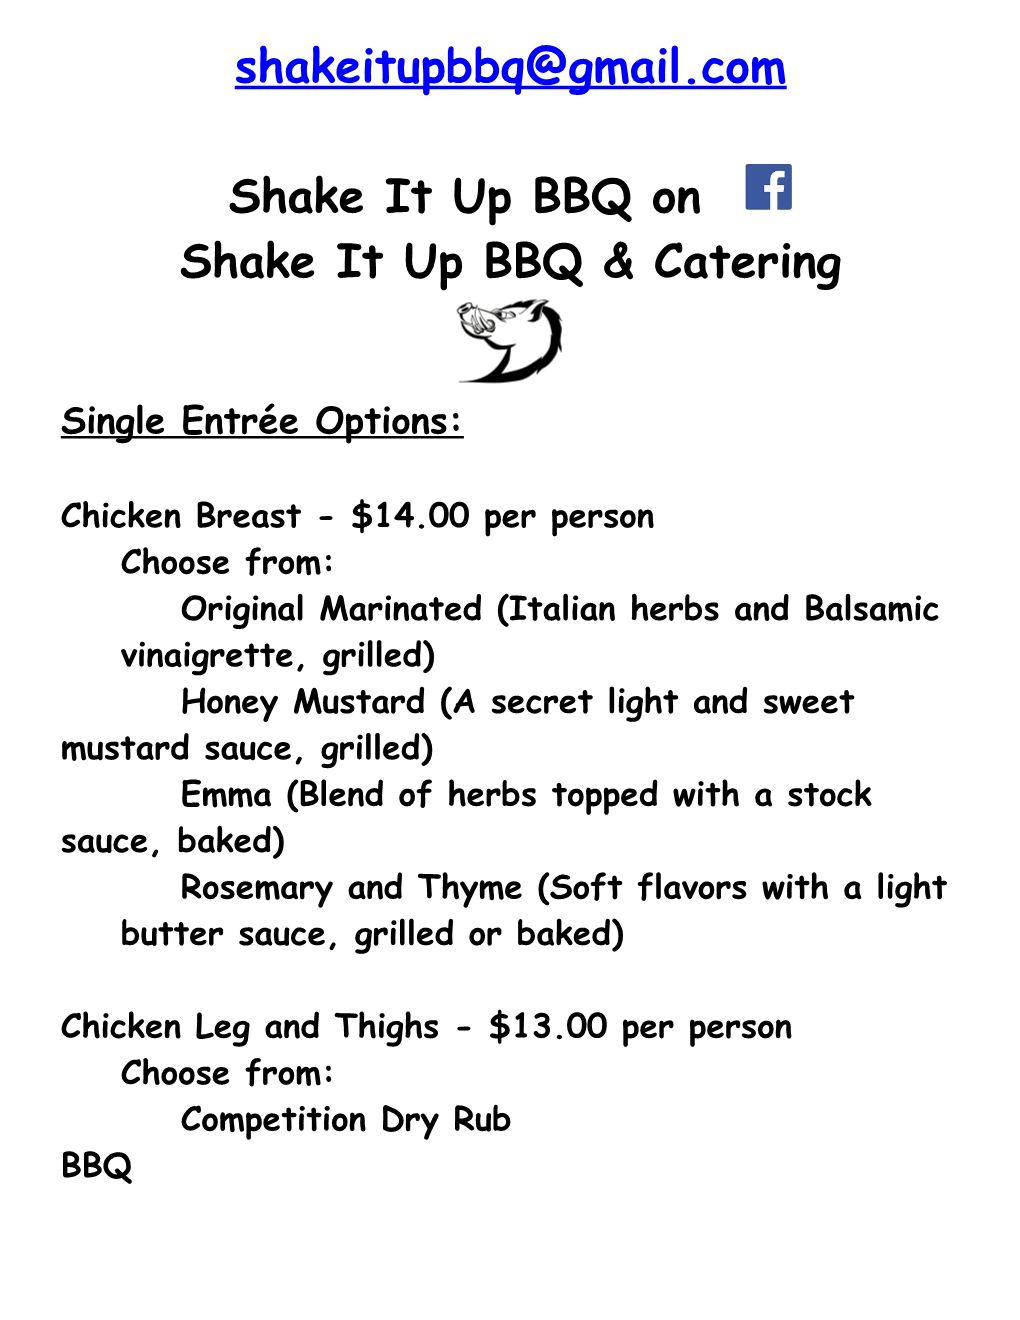 Shake It up BBQ & Catering